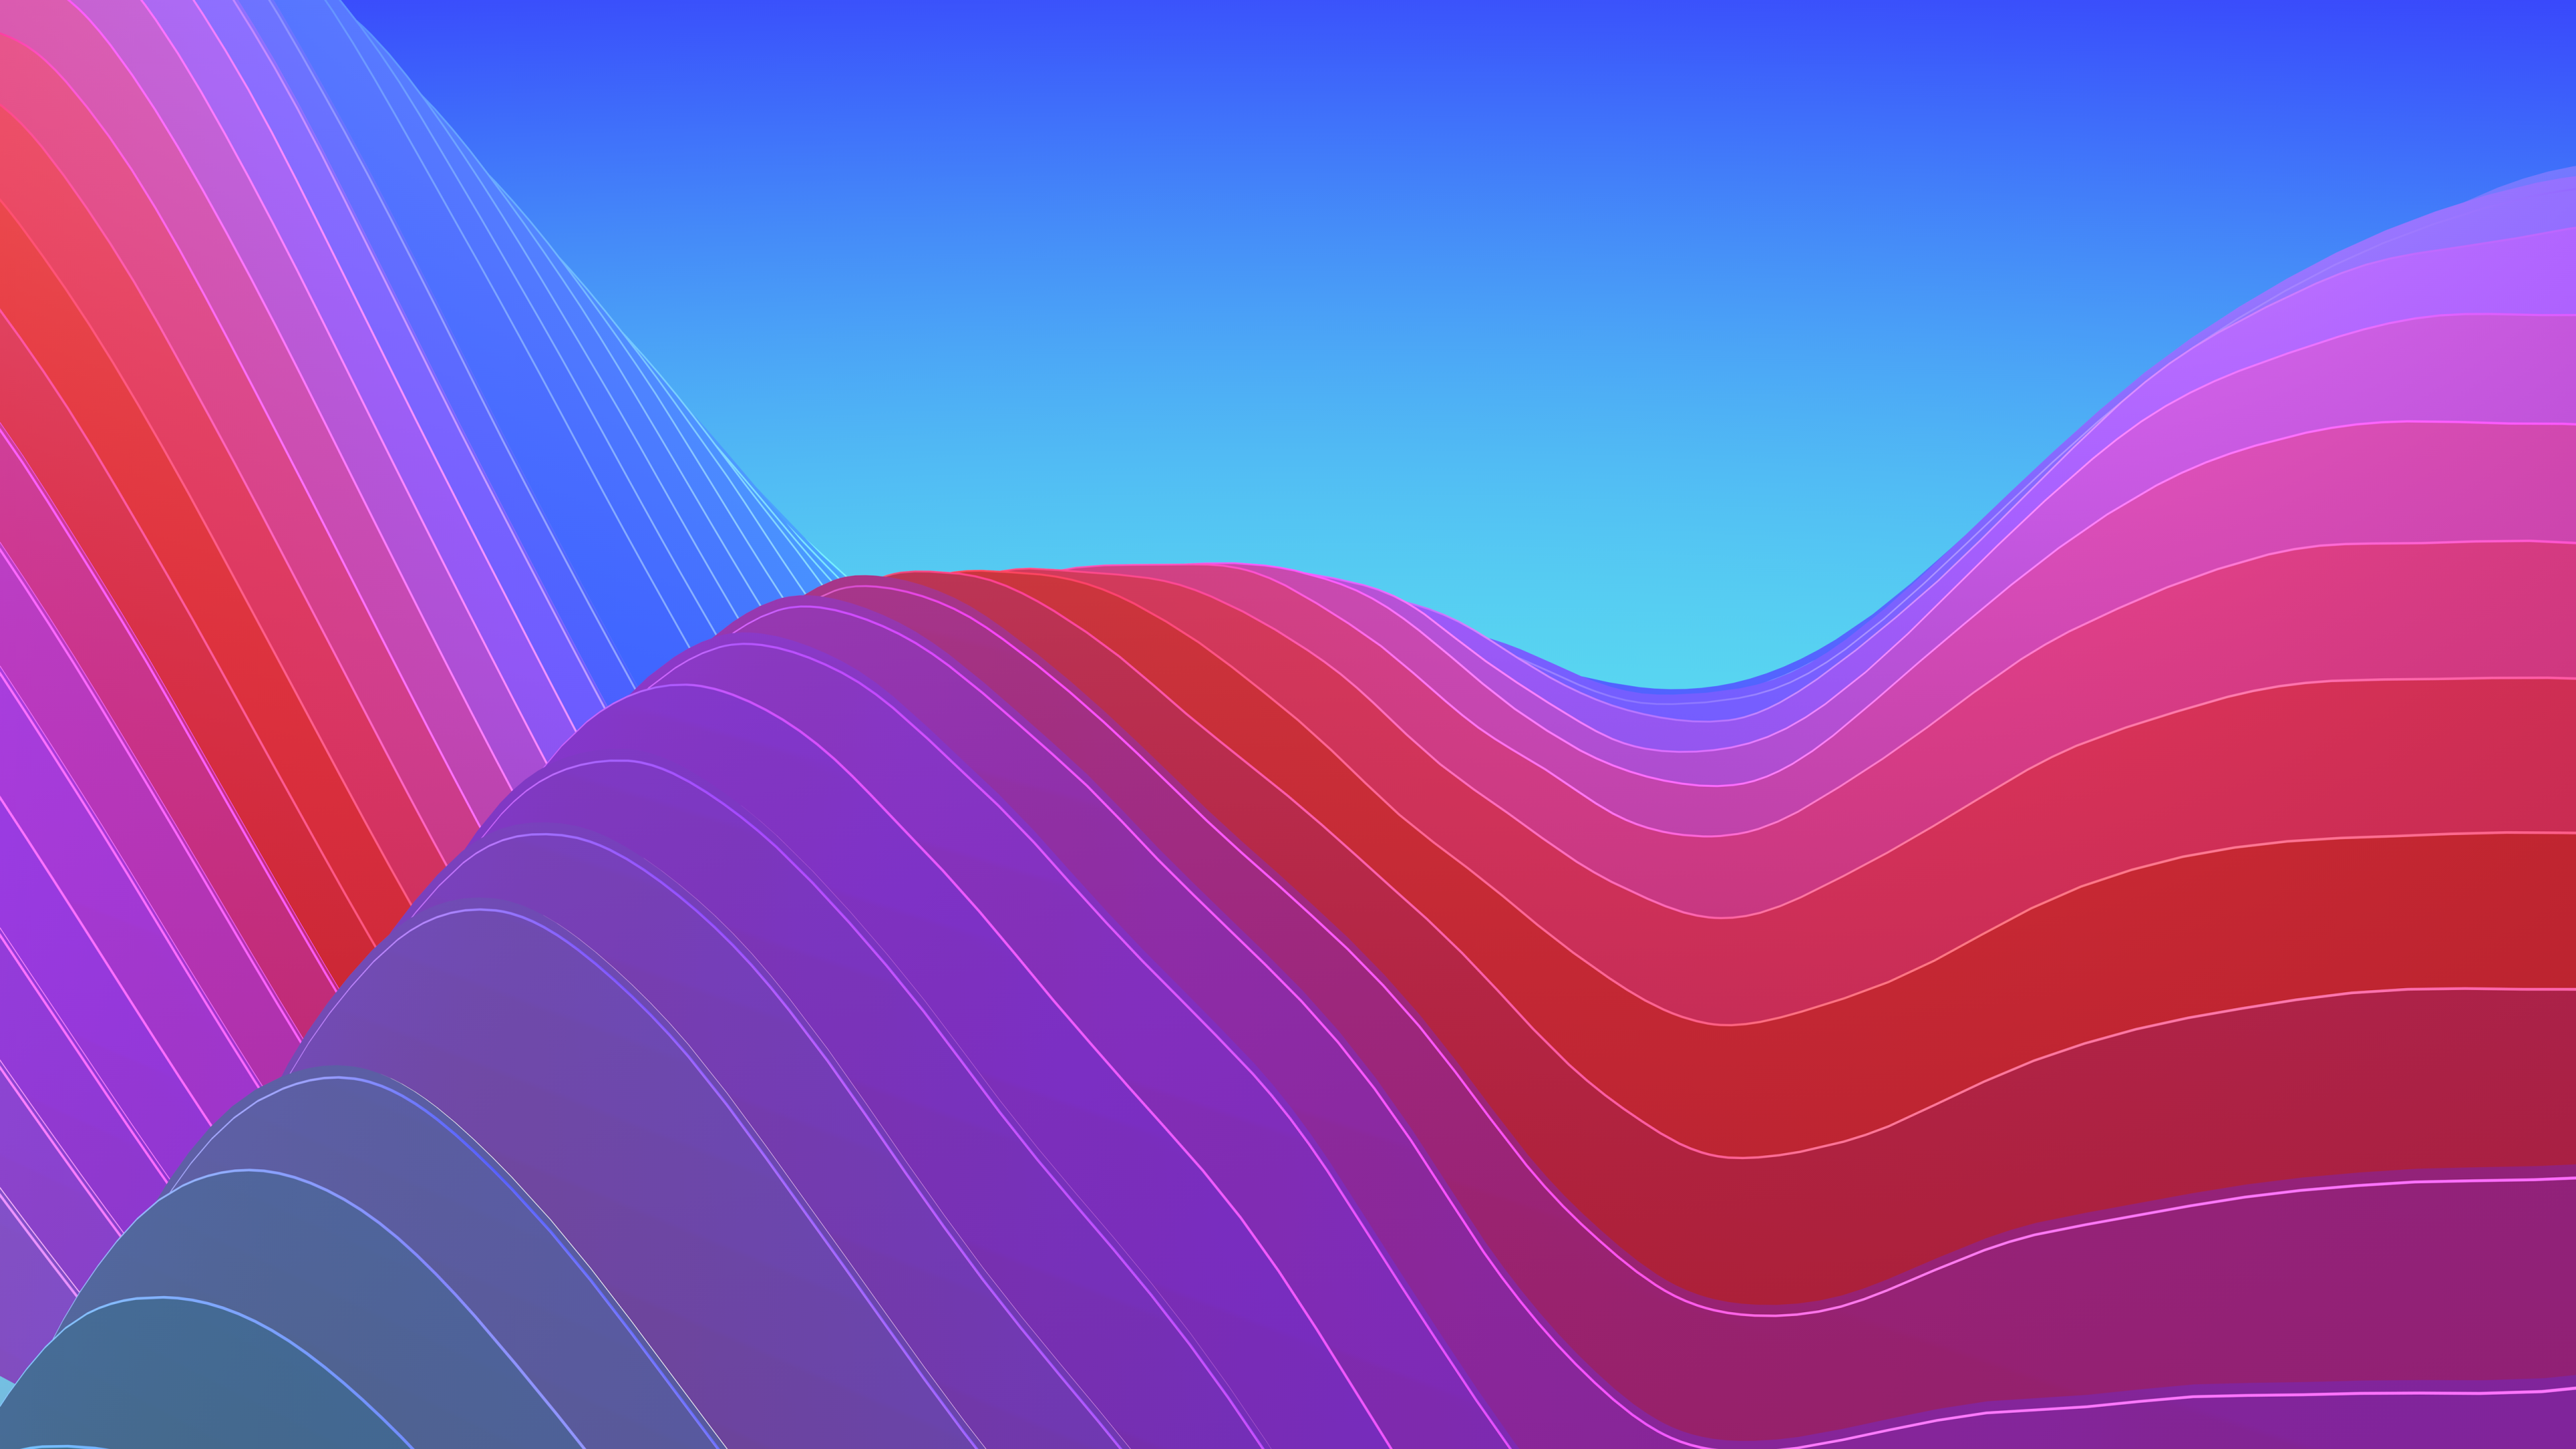 Wallpapers Waves, Gradient, iOS 11, Colorful, iPhone X, HD, 5K